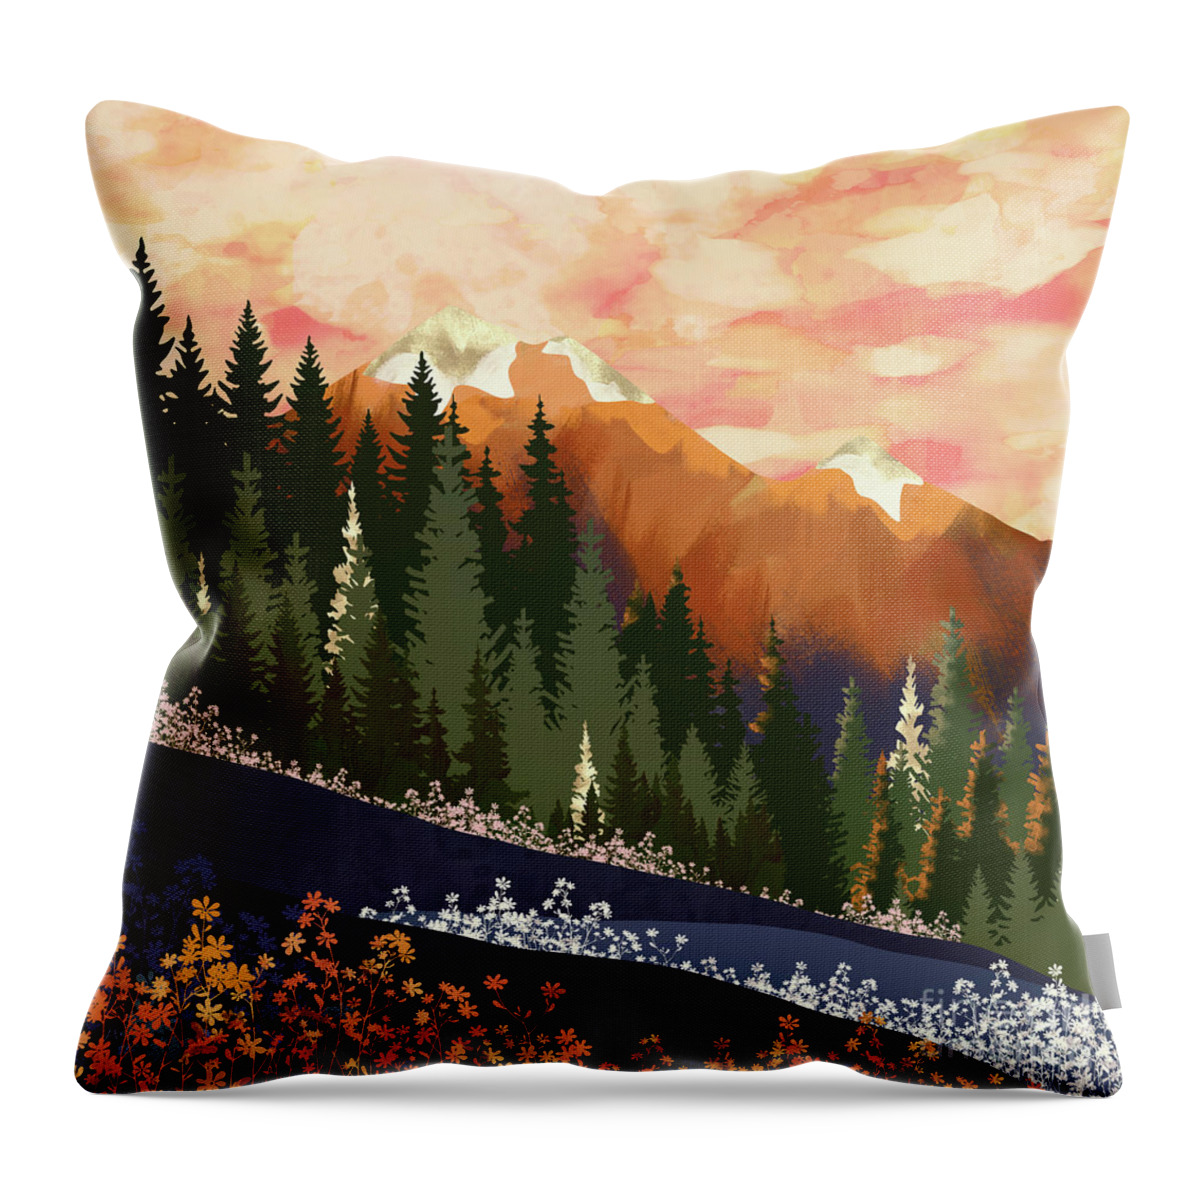 Mountains Throw Pillow featuring the digital art Mountain Dusk by Spacefrog Designs